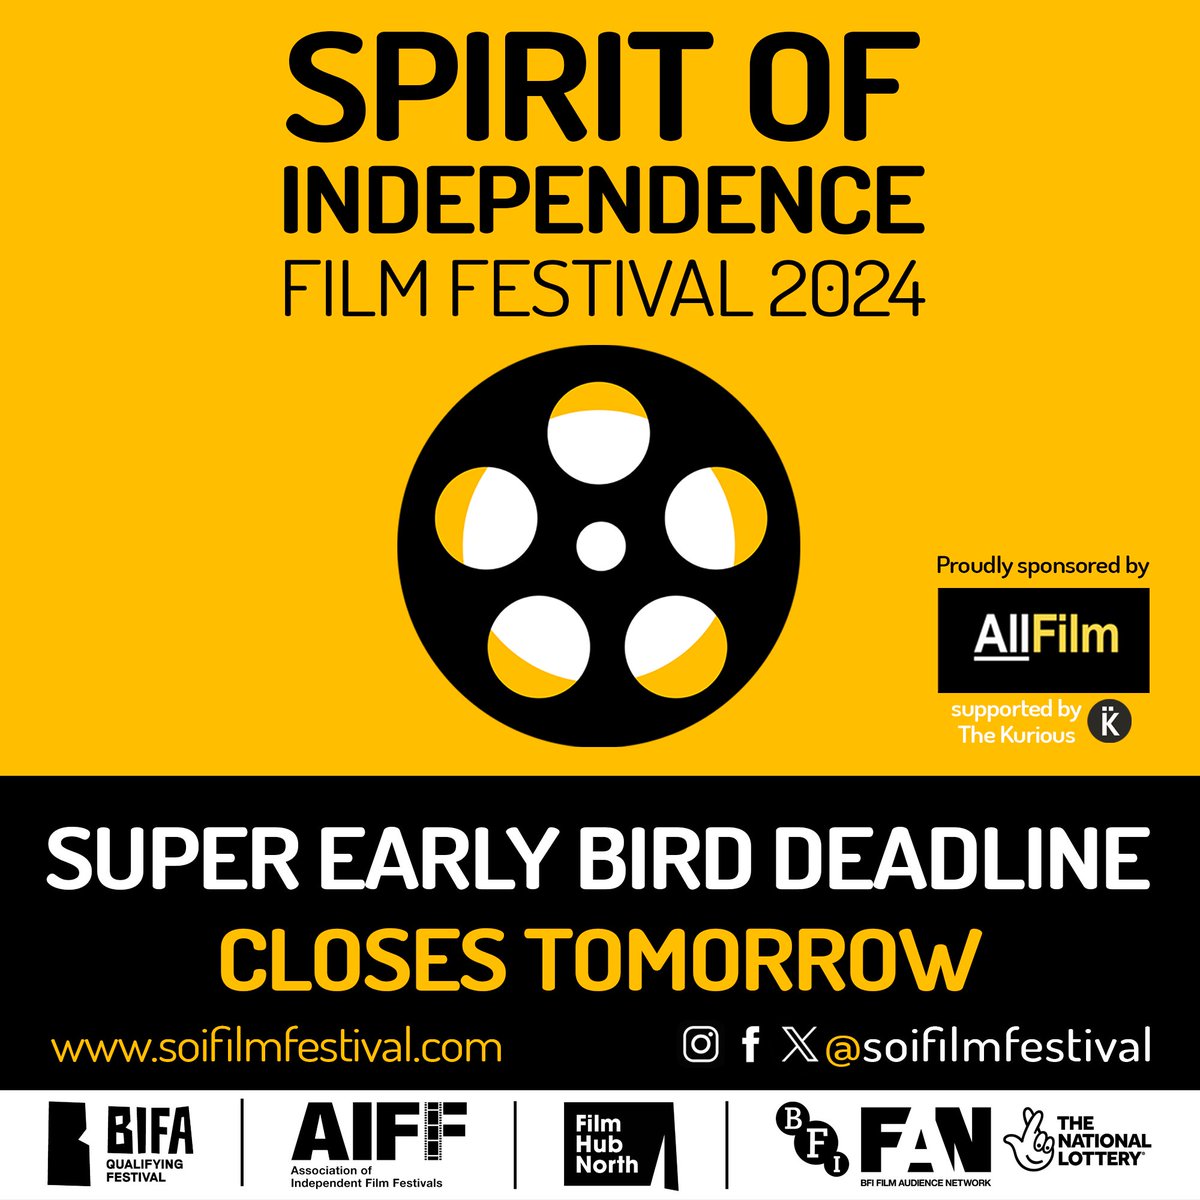 It’s our Superearlybird deadline tomorrow📆 We ❤️ all films across all genres from anywhere in the world - if you’ve got a short or a feature, we’d love to see if you could be a part of the festival running this September at @showroomcinema Details👇 filmfreeway.com/SpiritofIndepe…